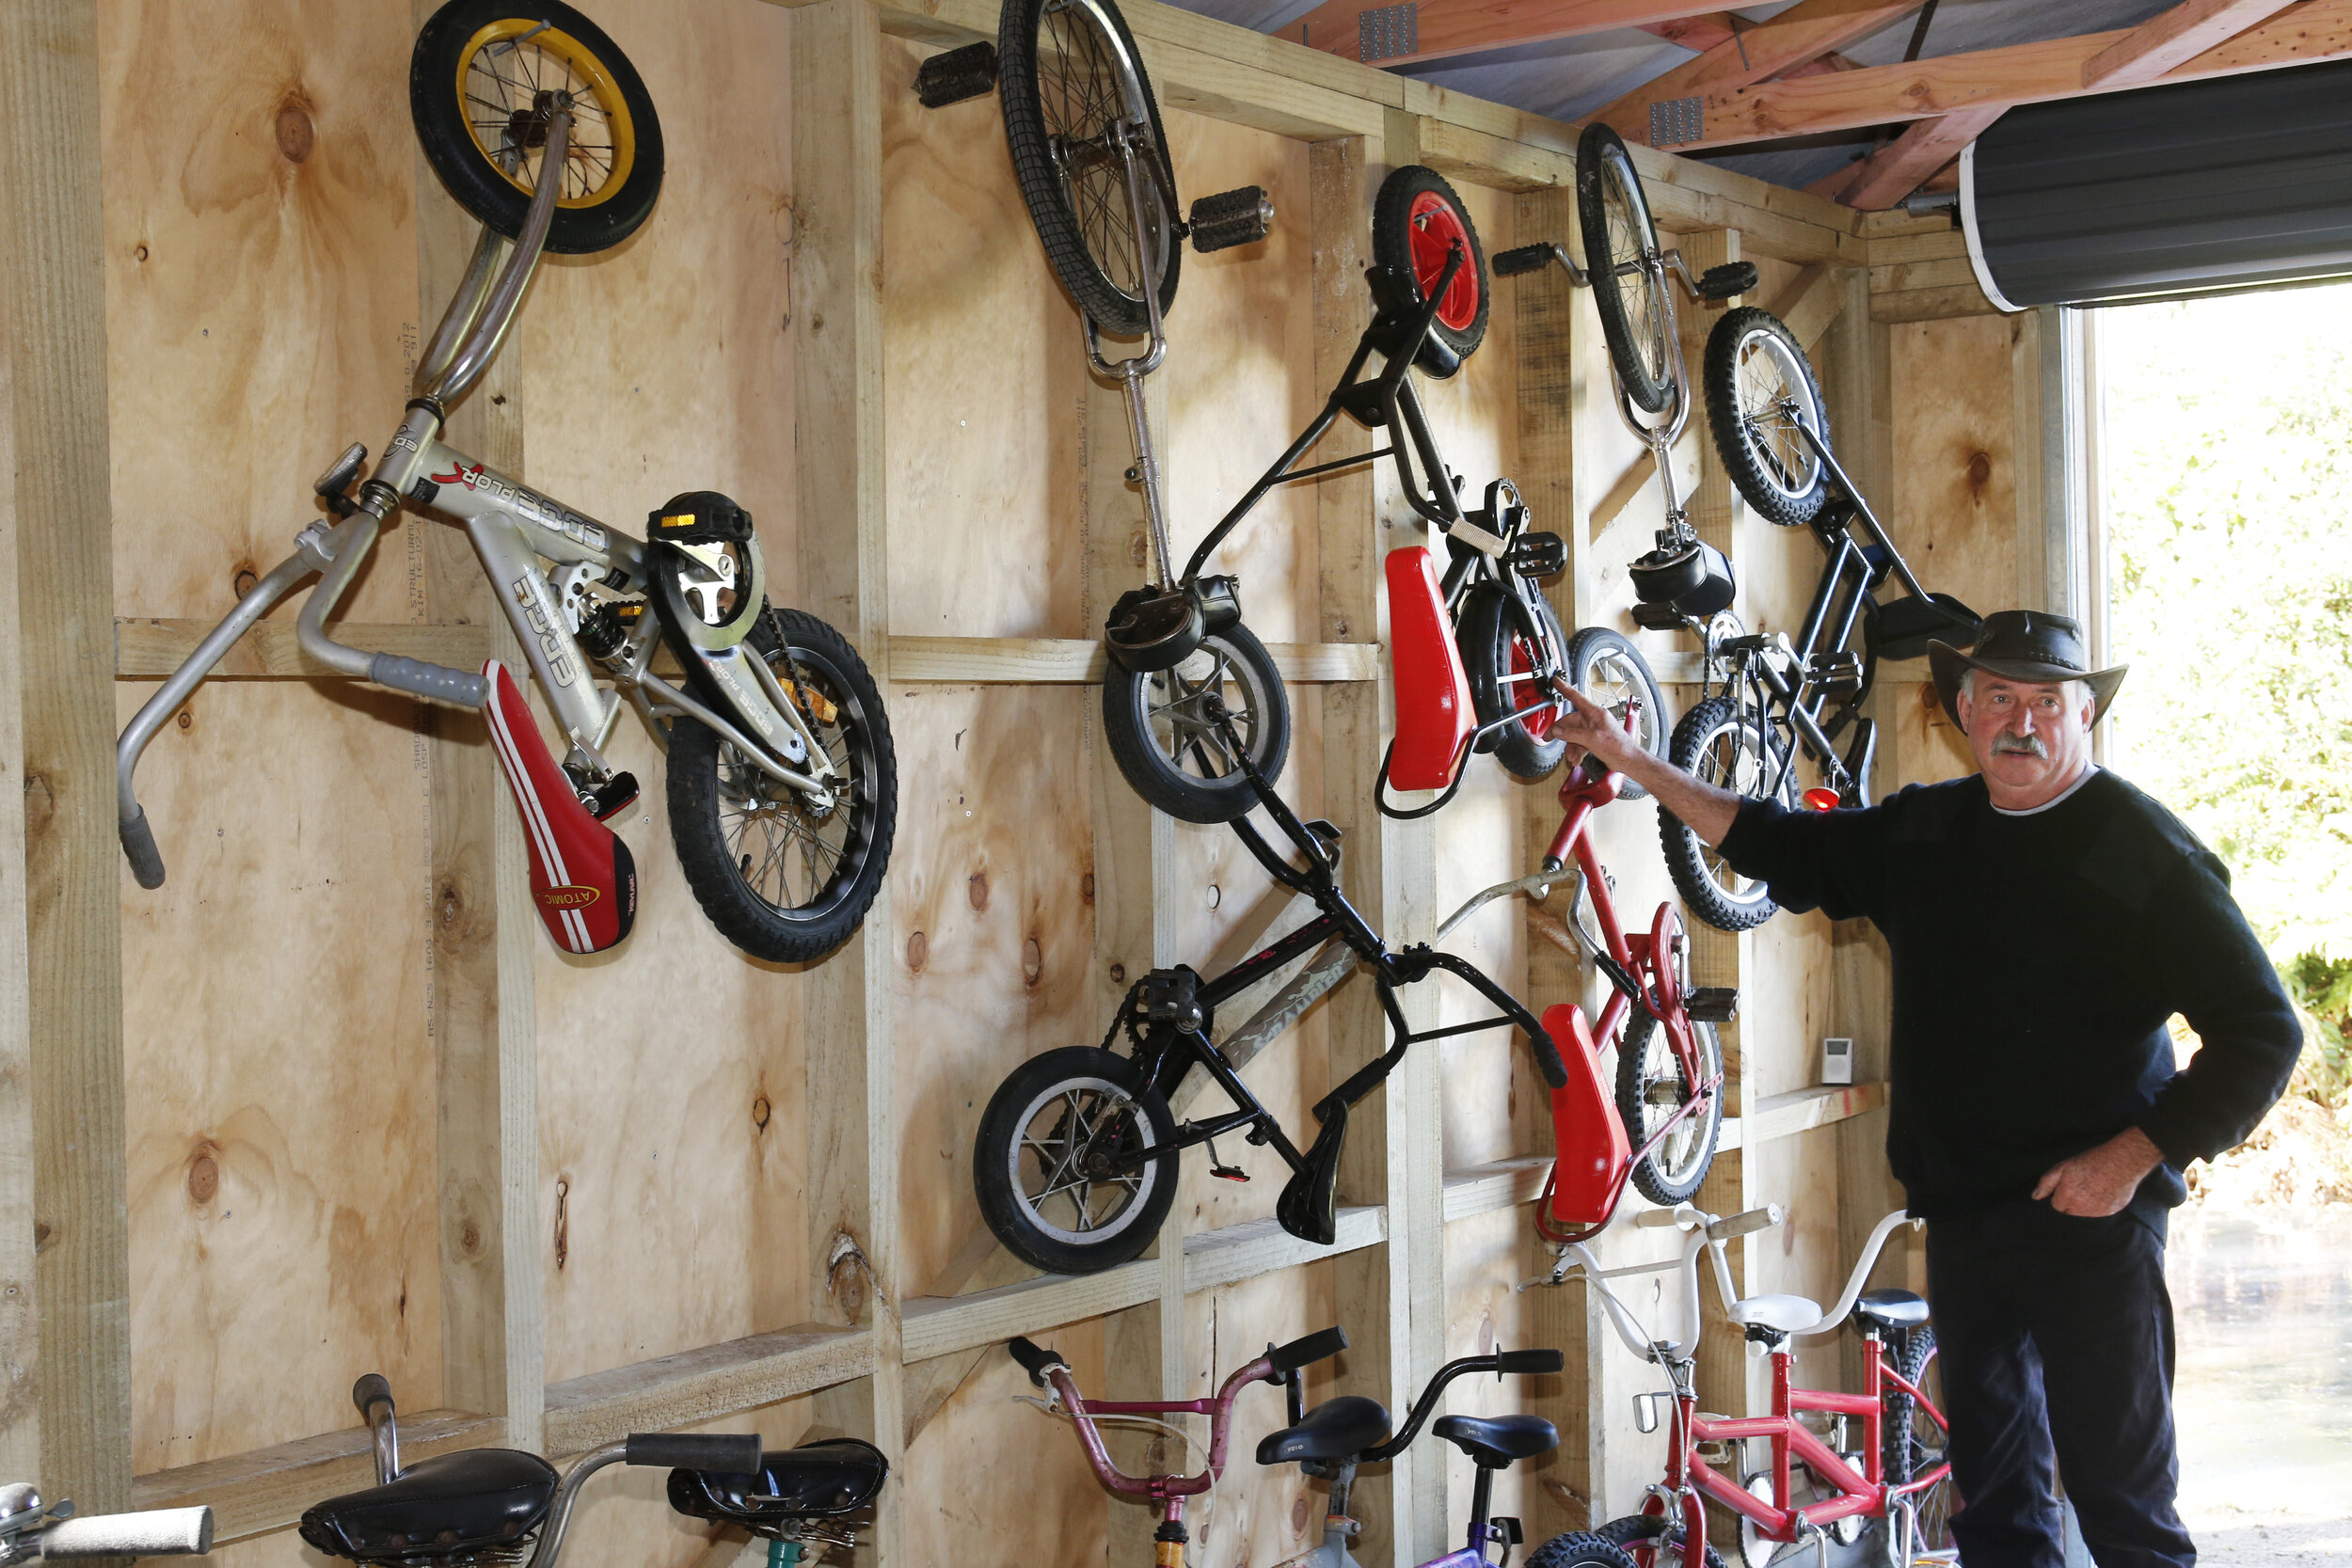 Part of Gary’s collection of recycled bikes, including a couple of unicycles